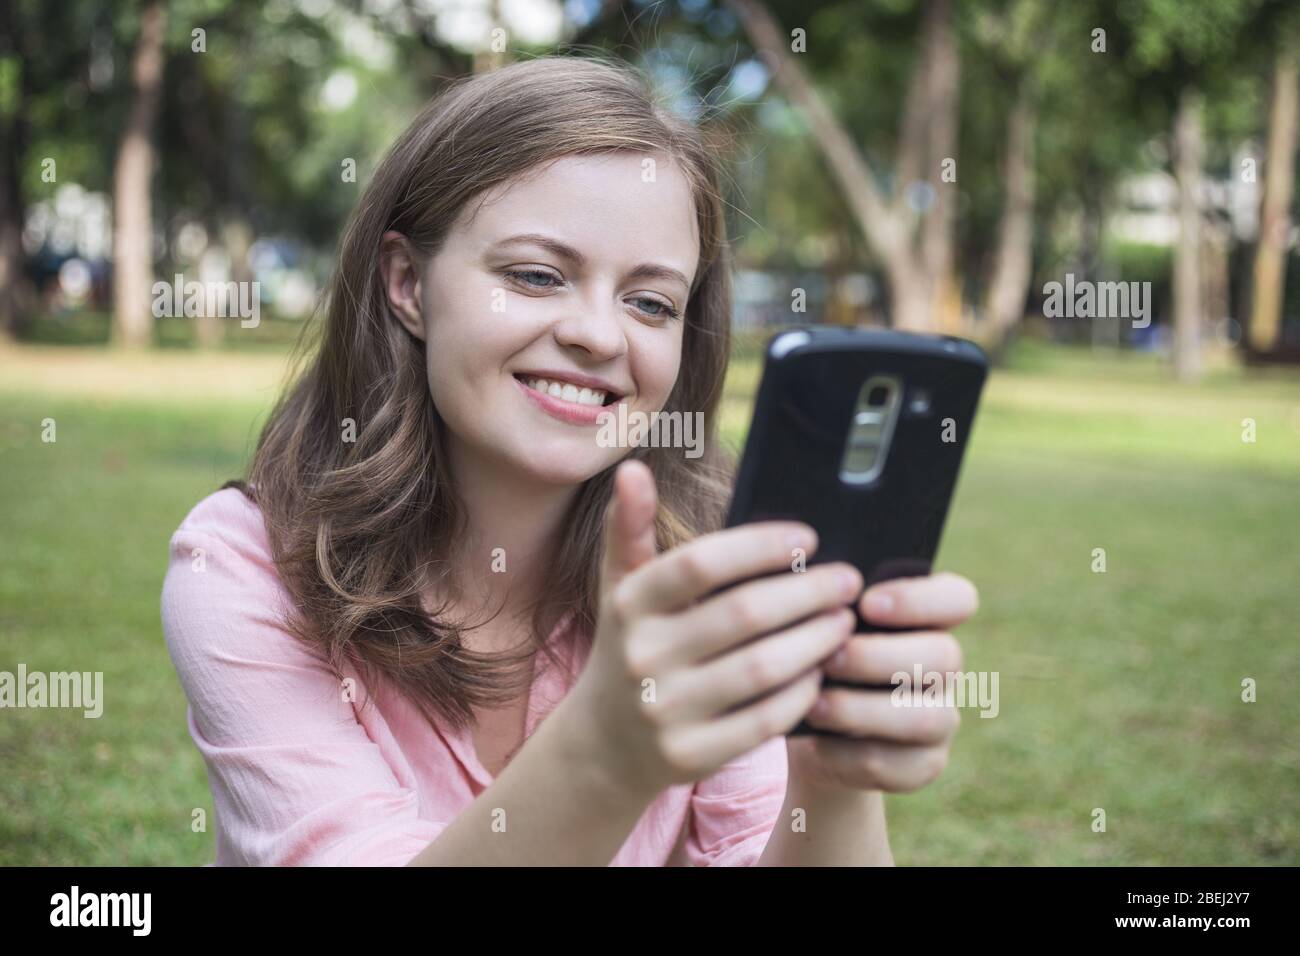 Young caucasian woman looking at the screen of the phone, smiling, looks happy. Outdoor picture. Stock Photo